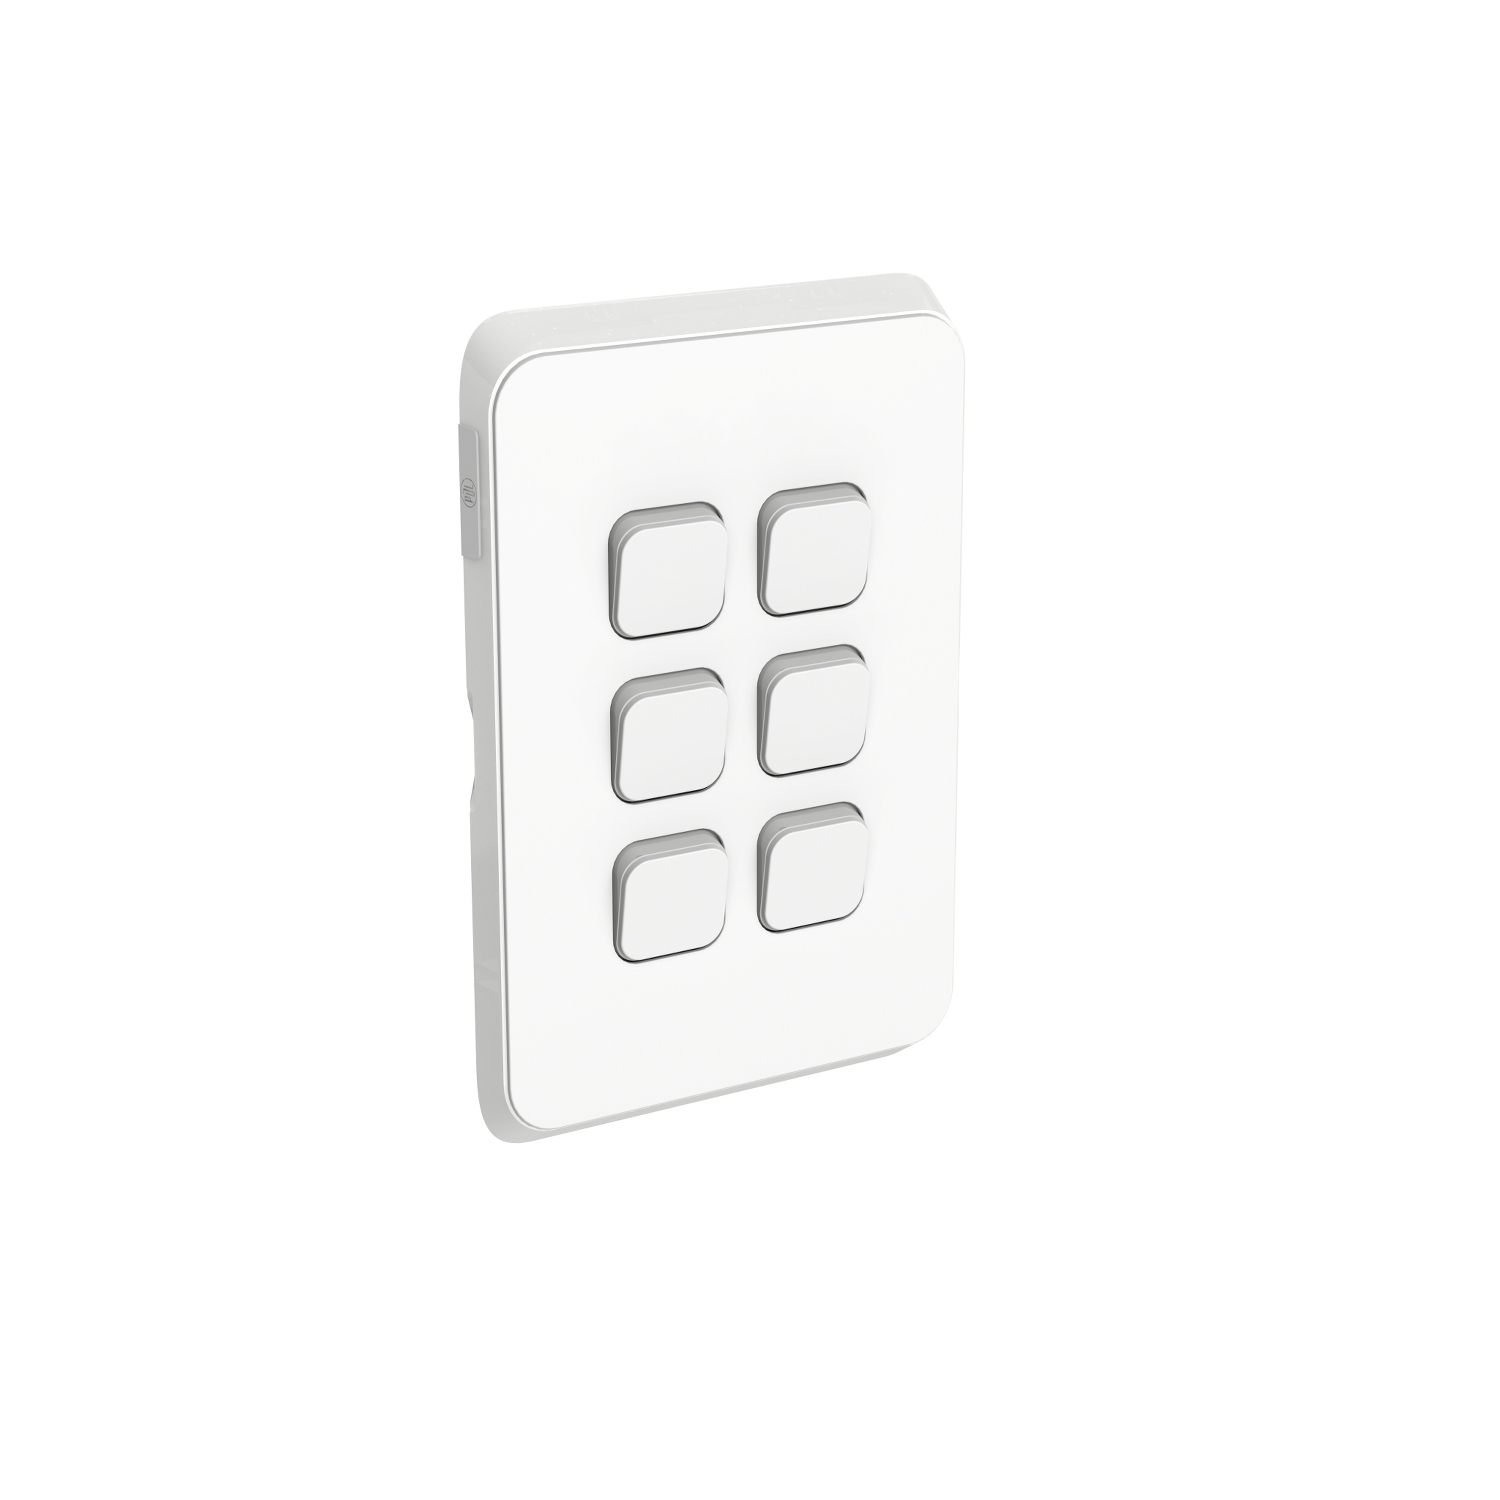 PDL386C-VW - PDL Iconic Cover Plate Switch 6Gang - Vivid White